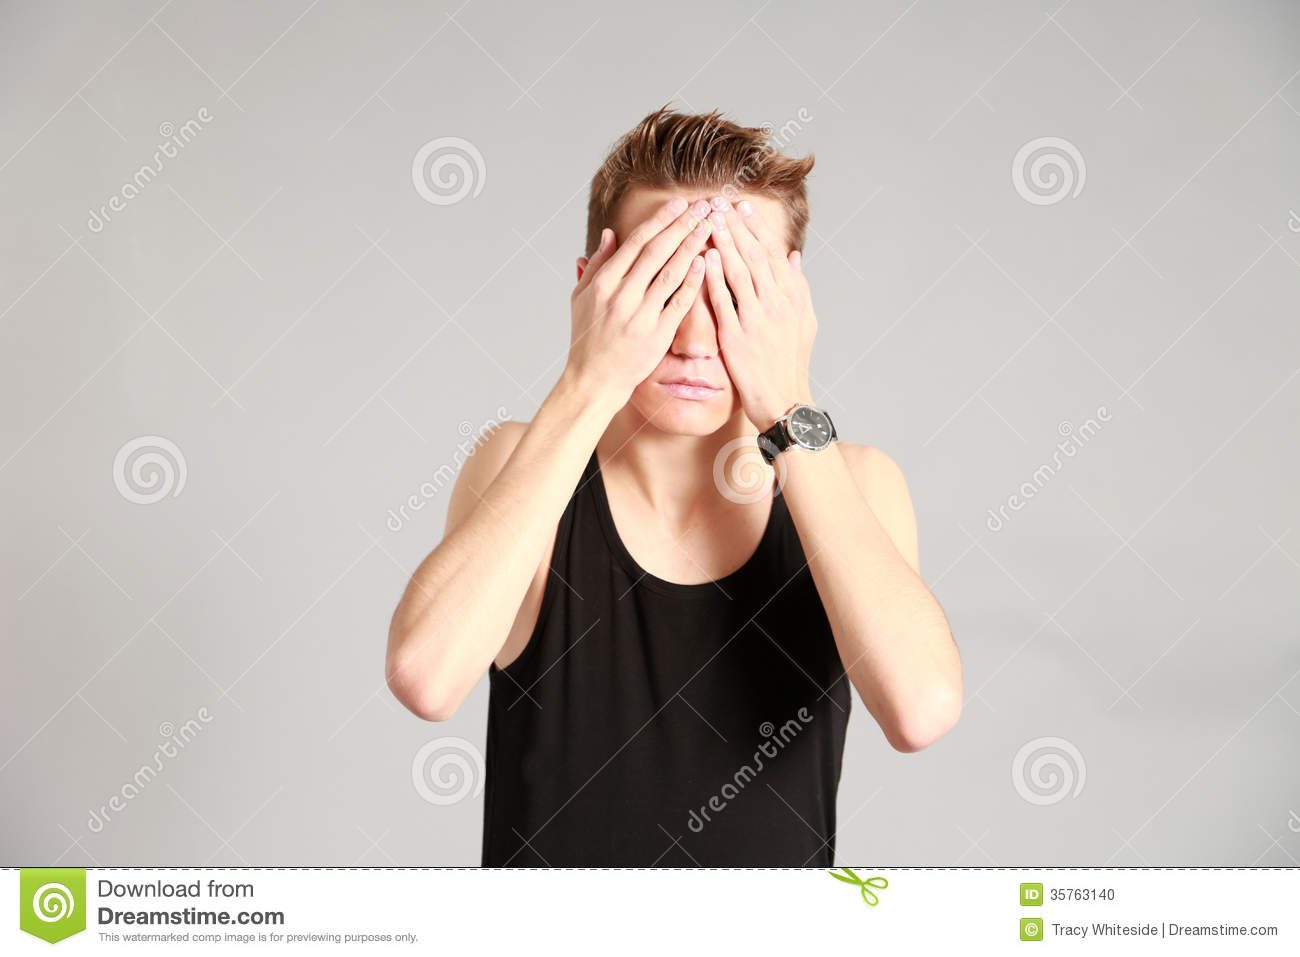 Male Model Covering Eyes With Hands Stock Photo   Image  35763140